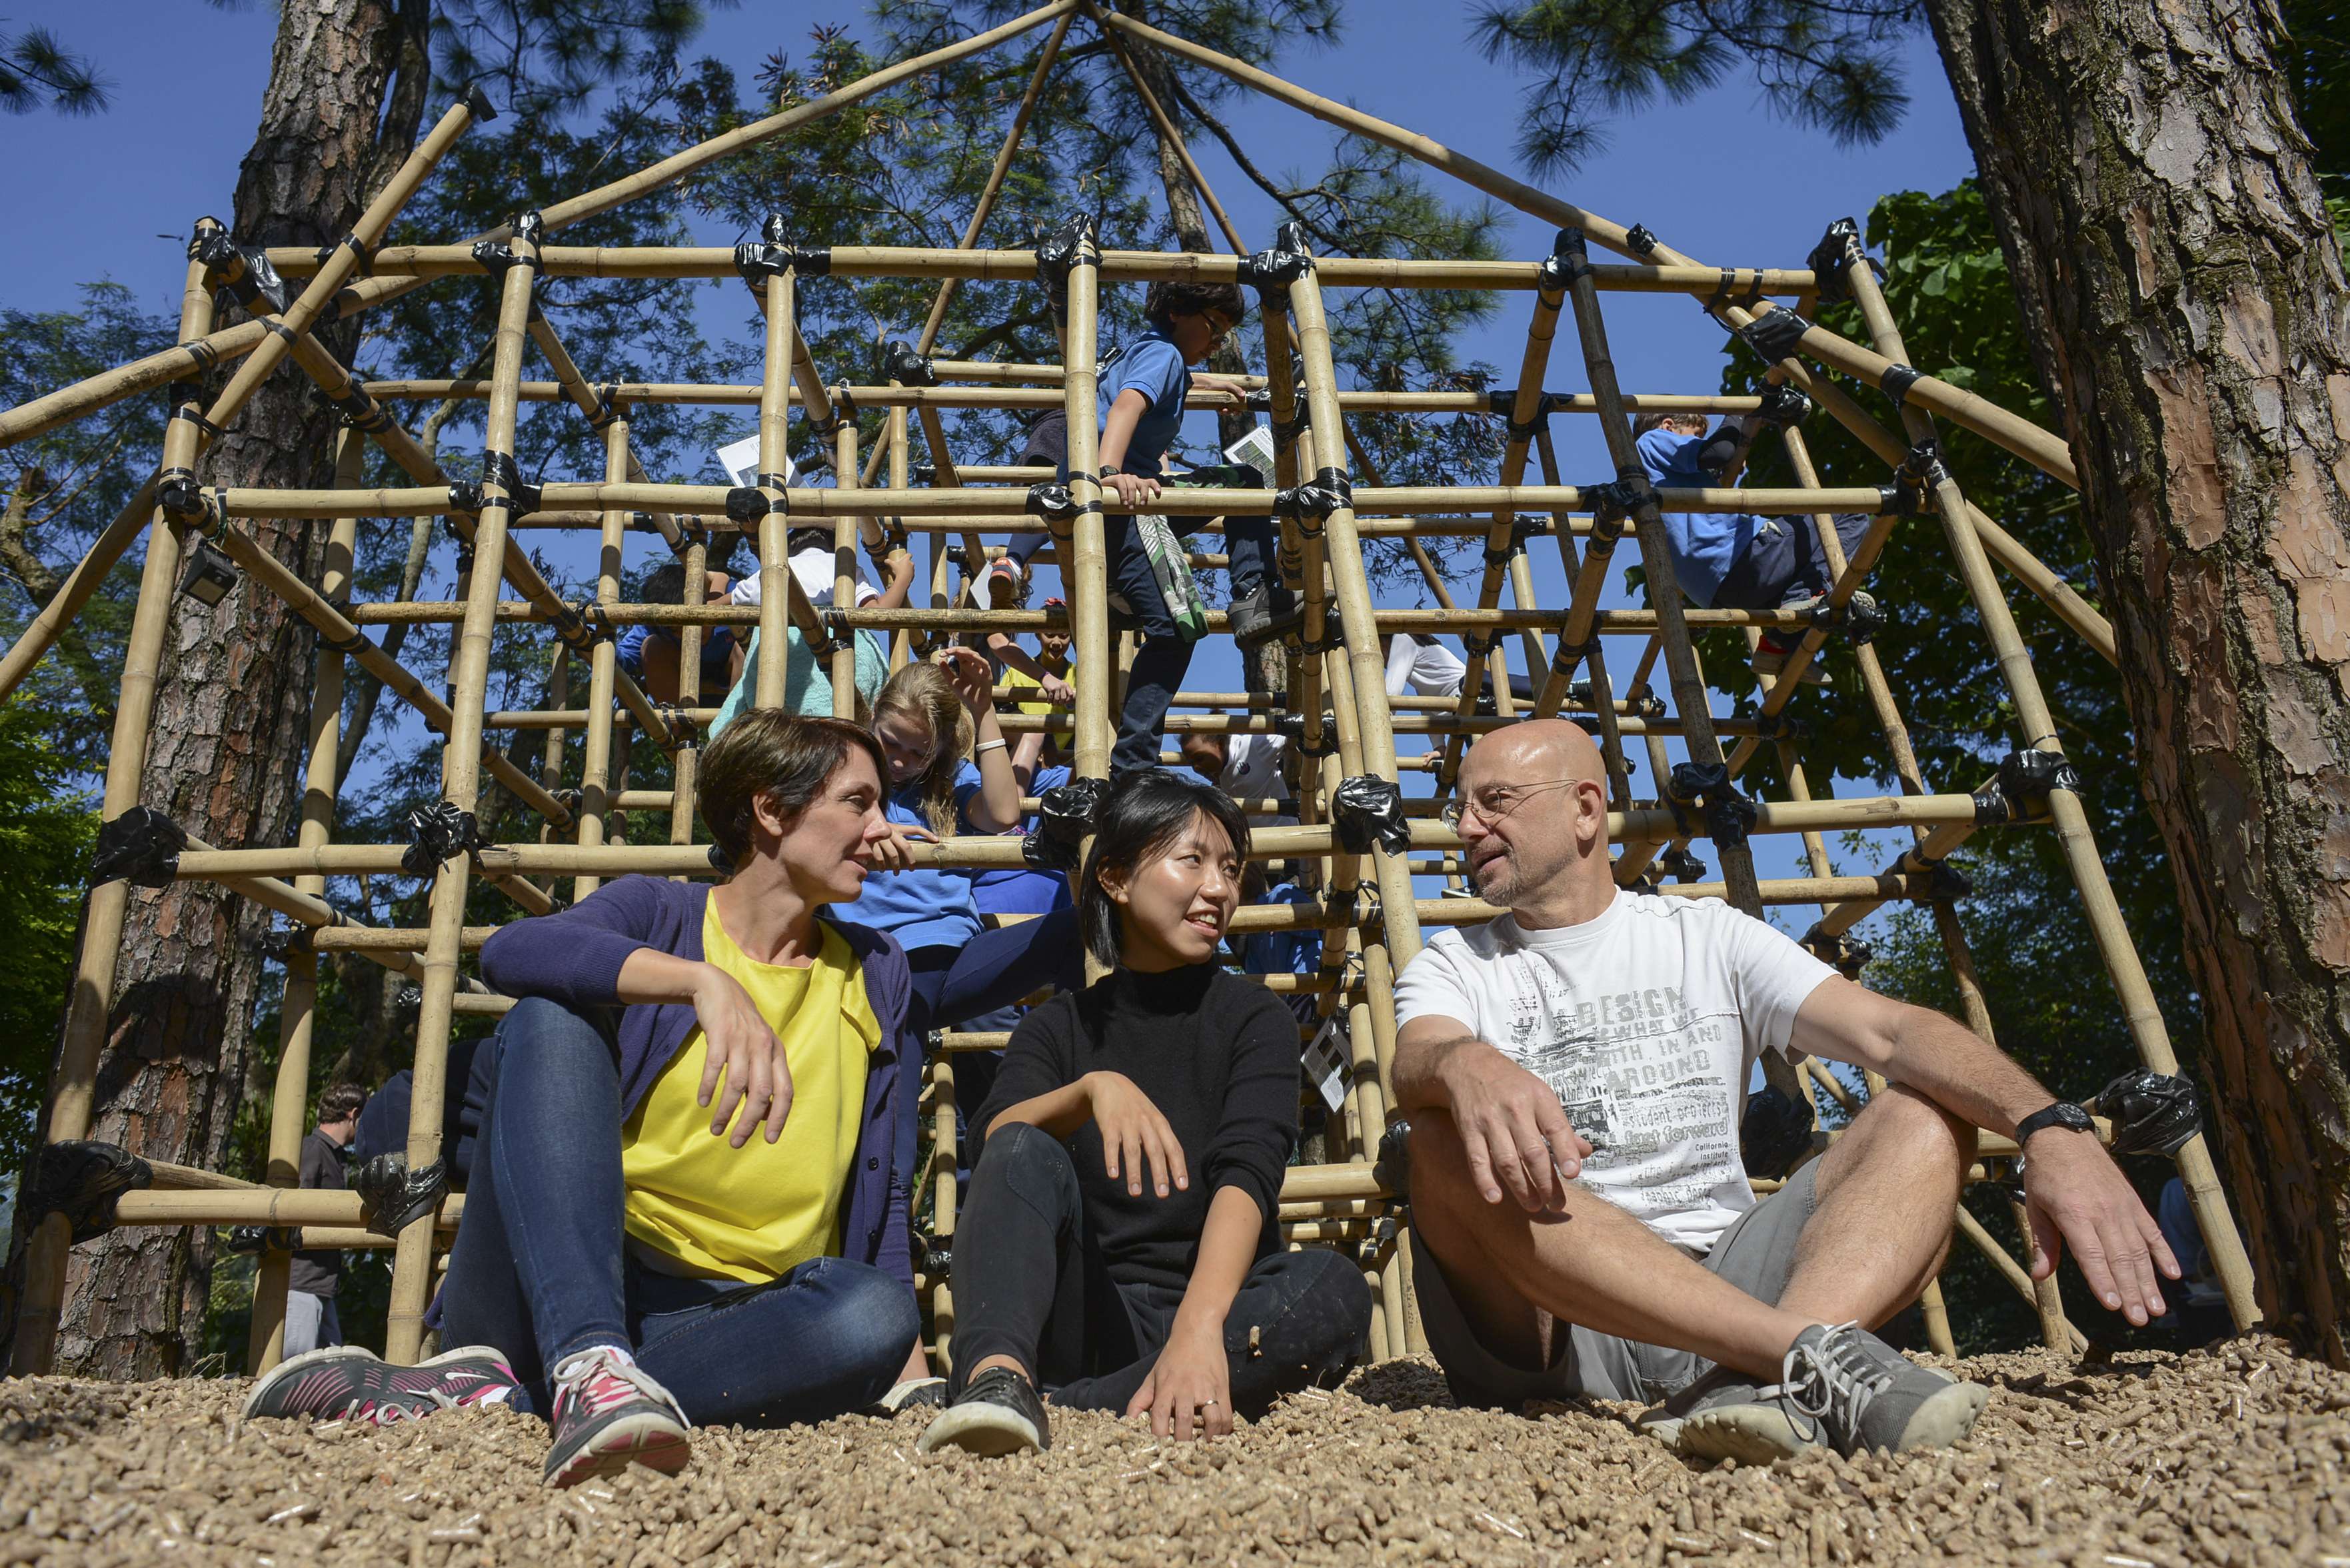 Rachel Wilson (left), Jenna Ho Marris (middle) and model maker Andy Niven at the Bamboo Biodiversity Jungle Gym in Tai Tam. Photo: Antony Dickson